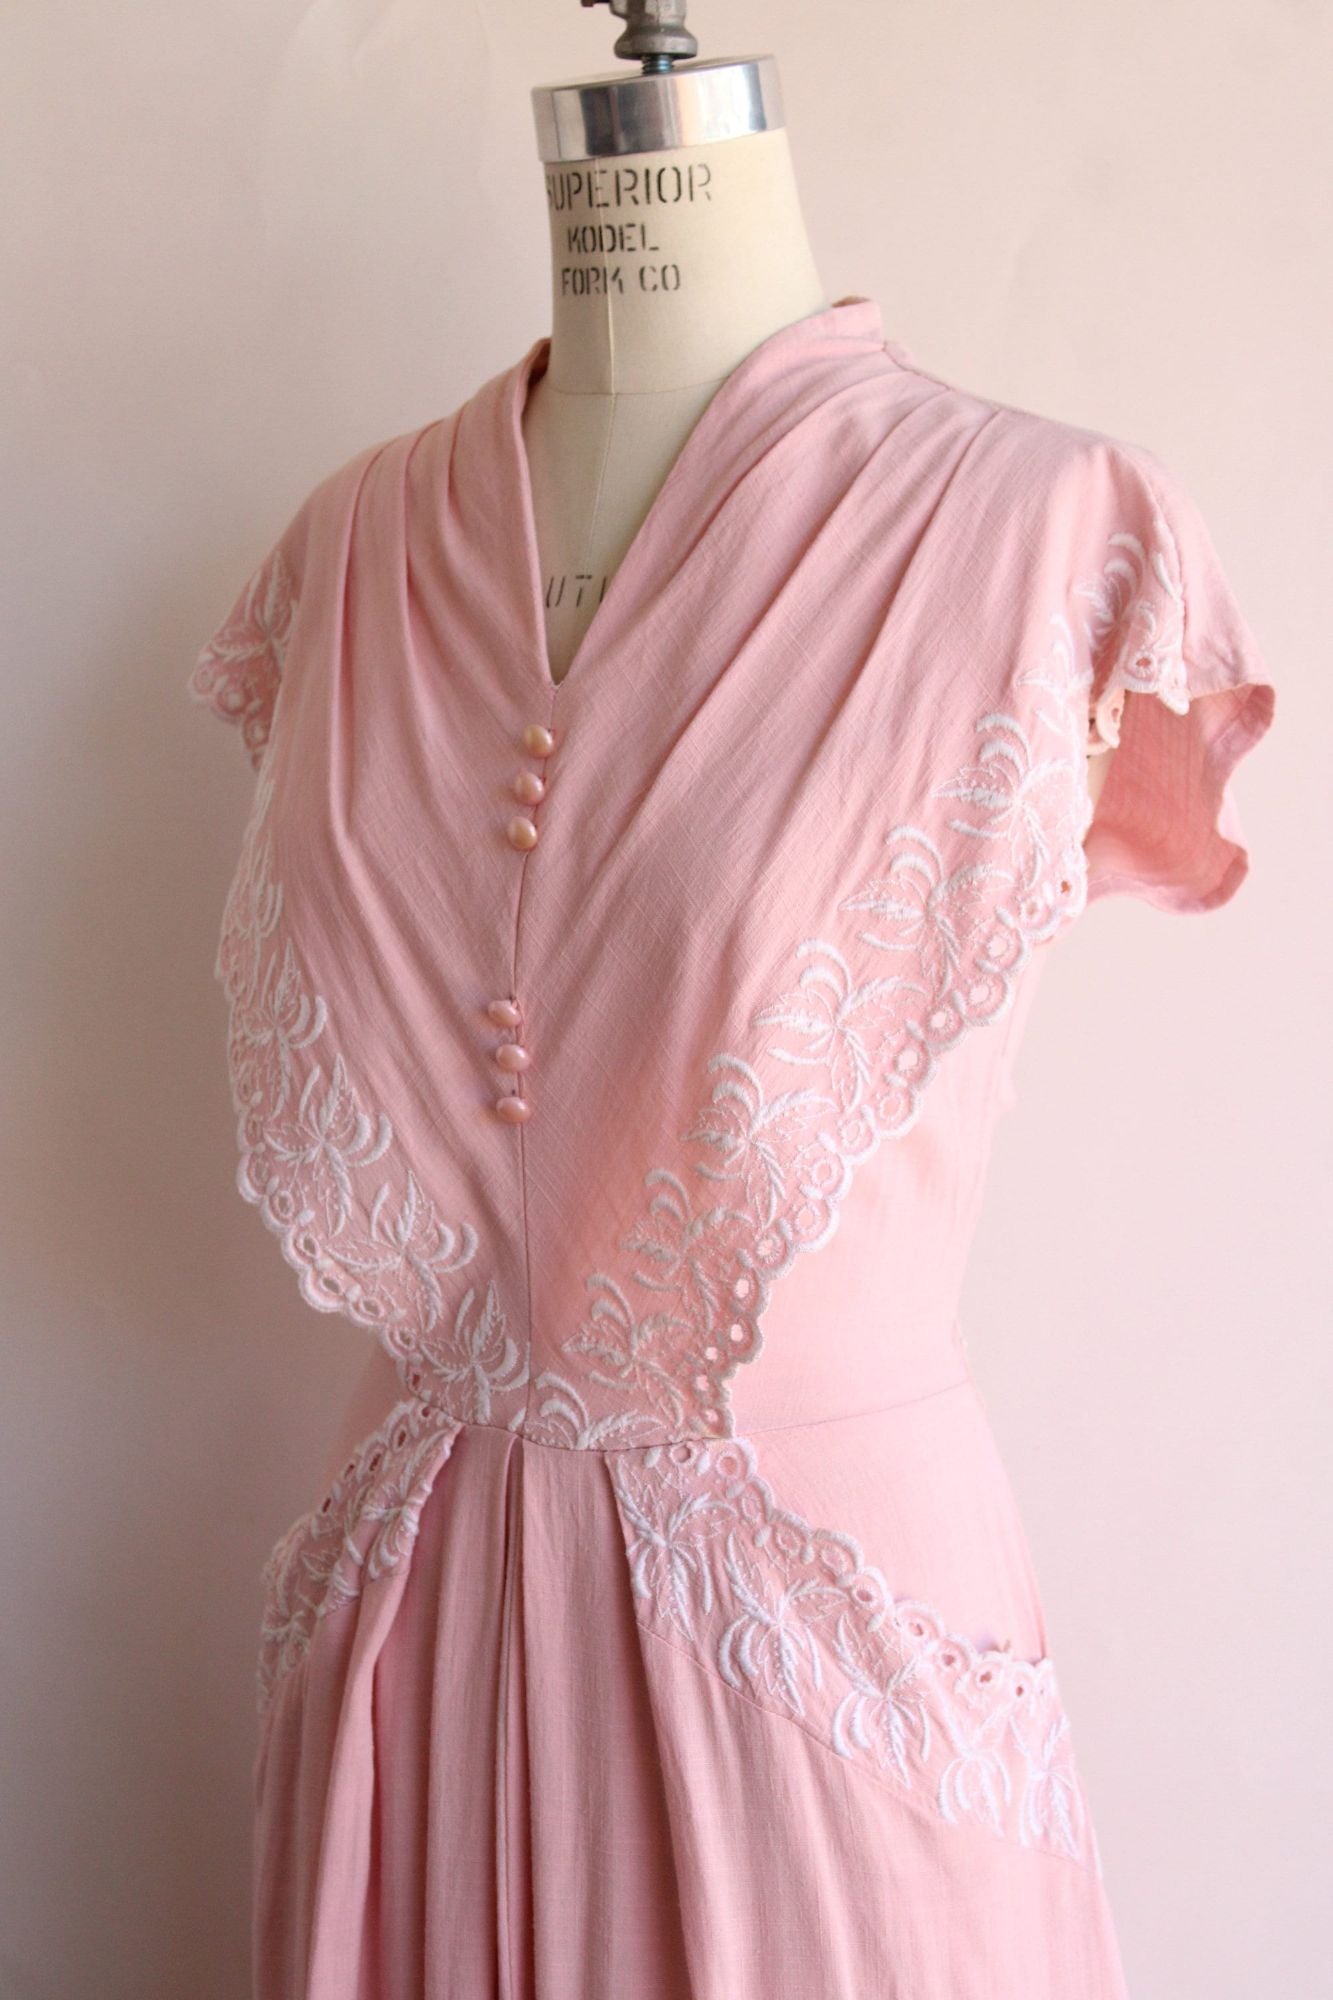 Vintage 1950s  Pink with White Floral Embroidery Cotton Day Dress